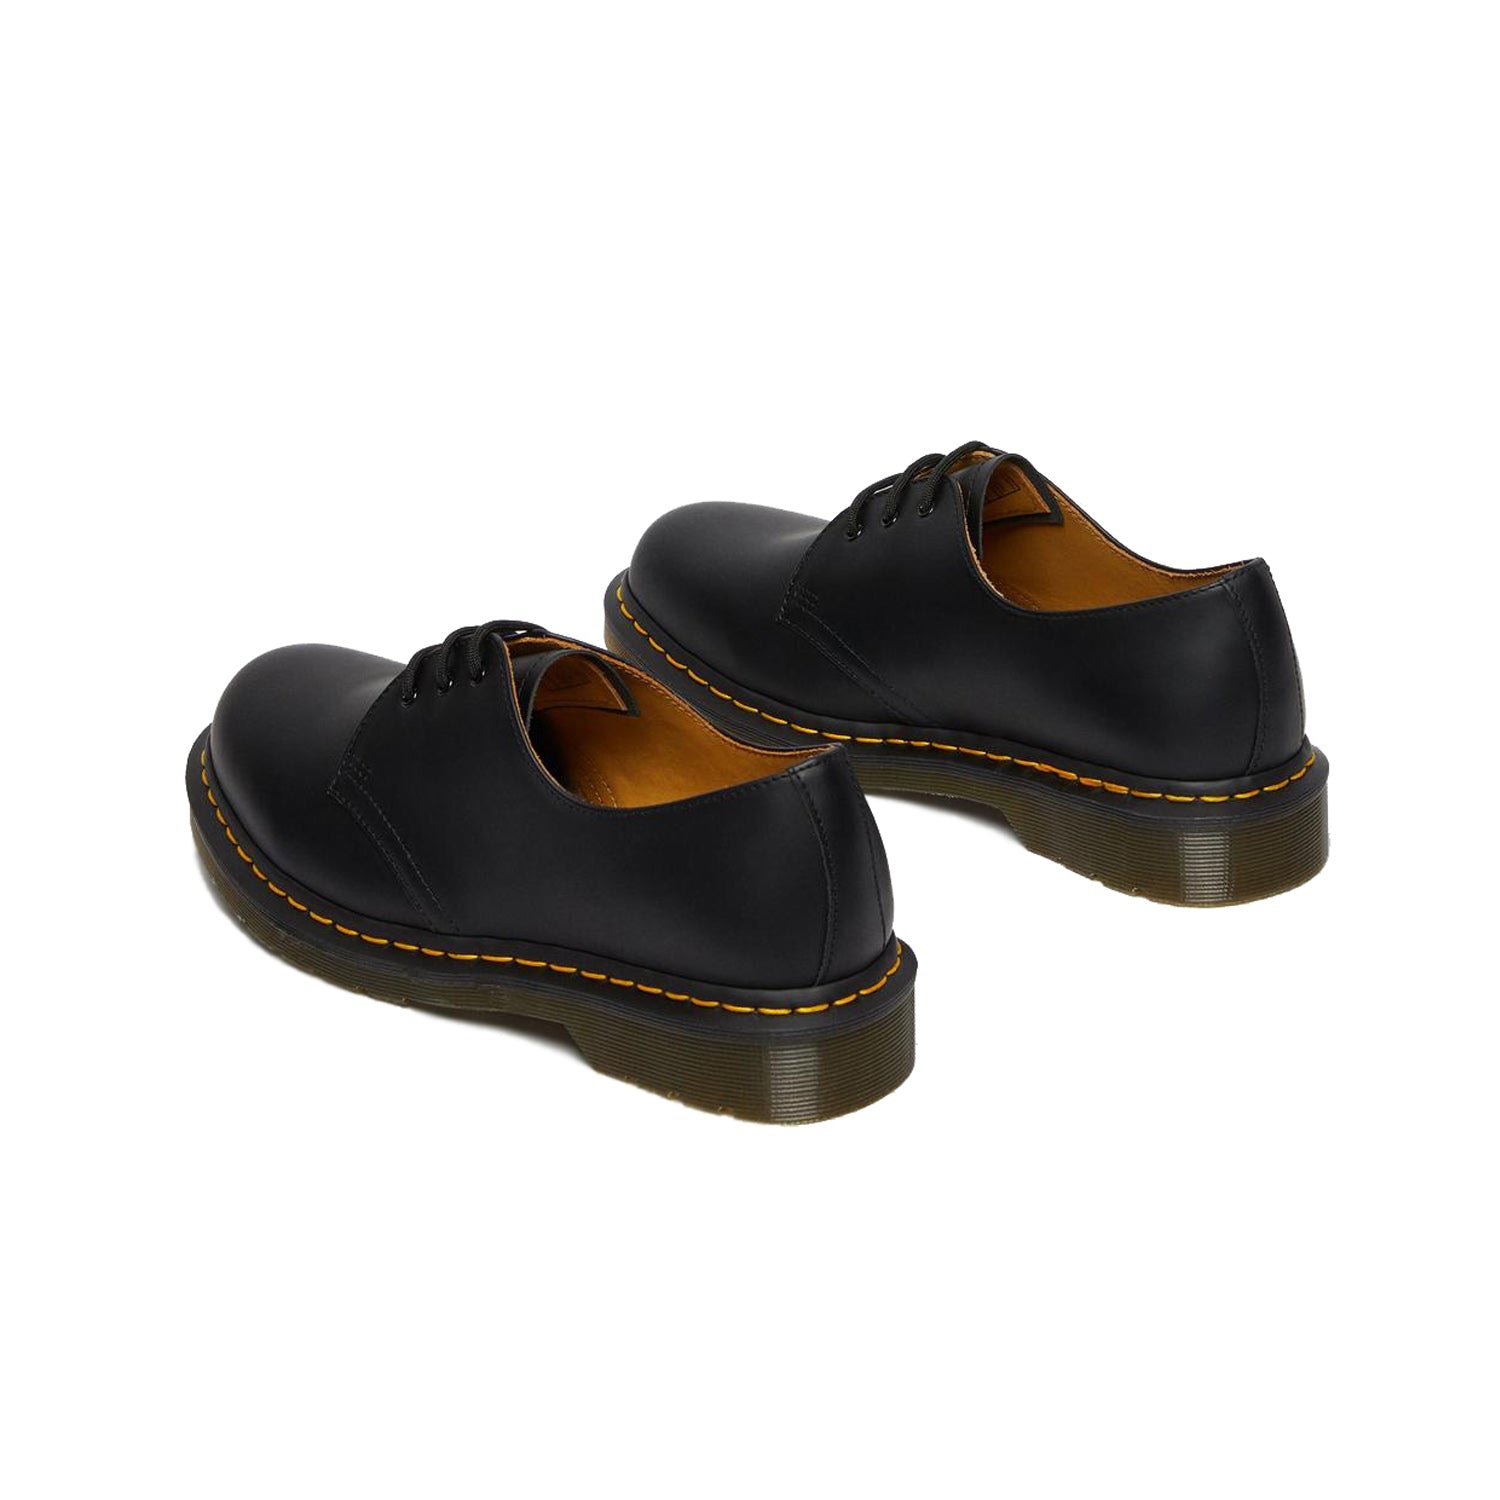 Dr. Martens 1461 Smooth Leather Shoes Black